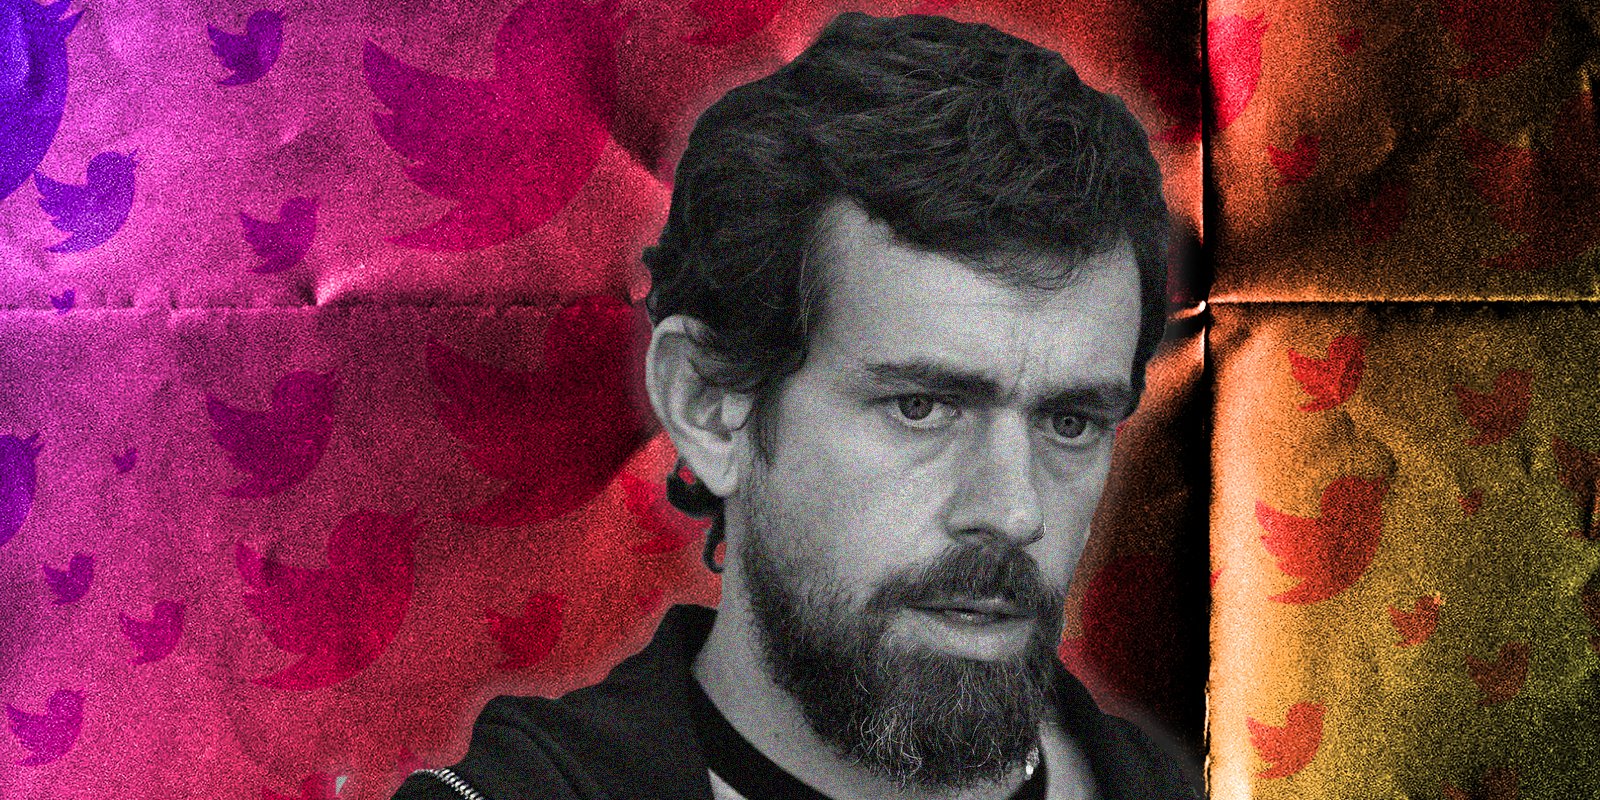 Republican Twitter investor may oust Jack Dorsey